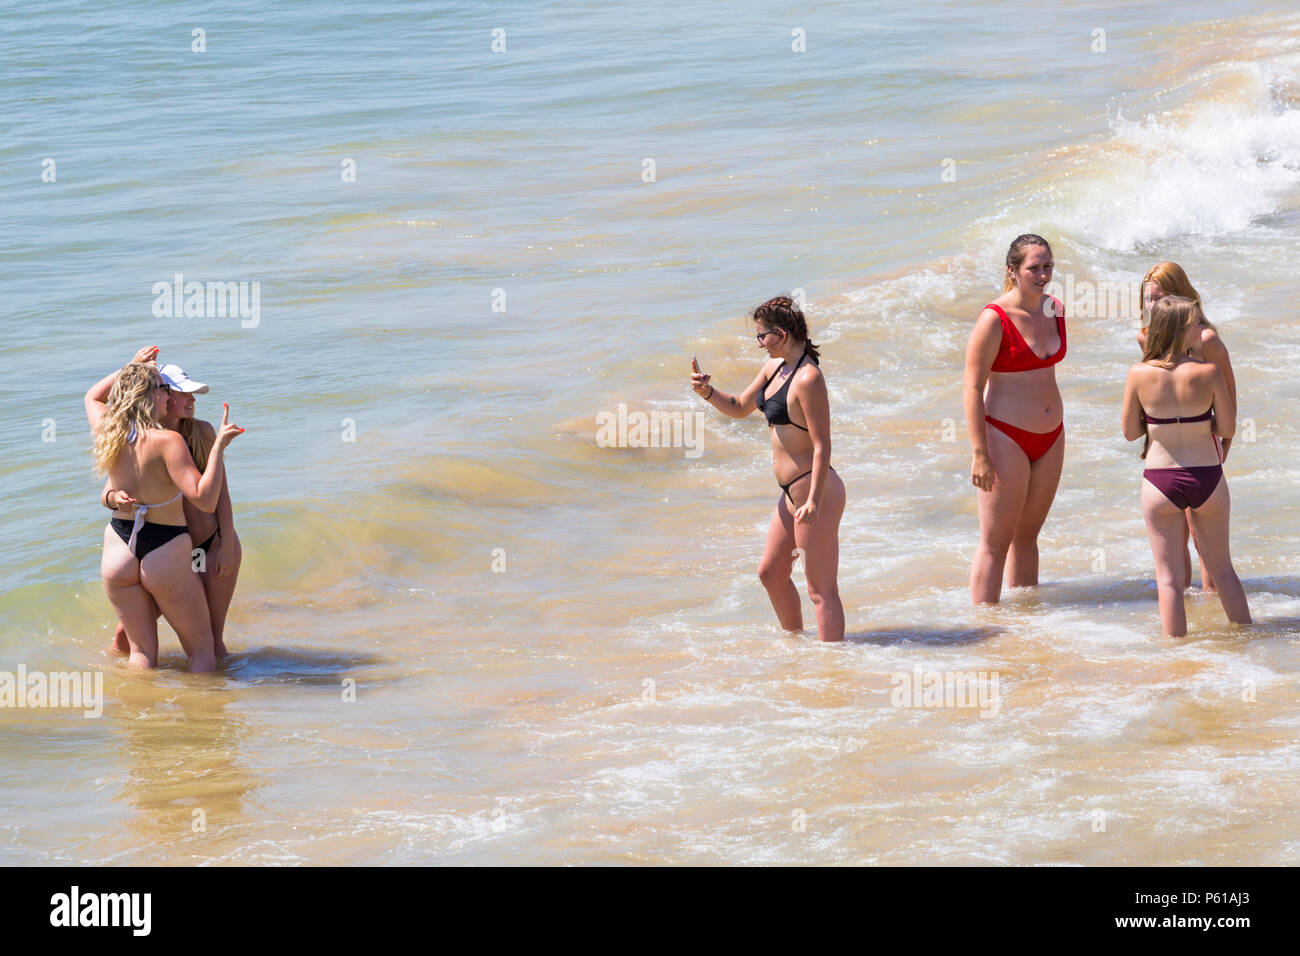 Bournemouth, Dorset, UK. 28th June, 2018. UK weather: sunseekers head to the beaches at Bournemouth on another hot sunny day with unbroken blue skies and sunshine. A slight breeze makes the heat more bearable. A group of friends in skimpy bikinis have fun playing in the sea and taking photos. Credit: Carolyn Jenkins/Alamy Live News Stock Photo